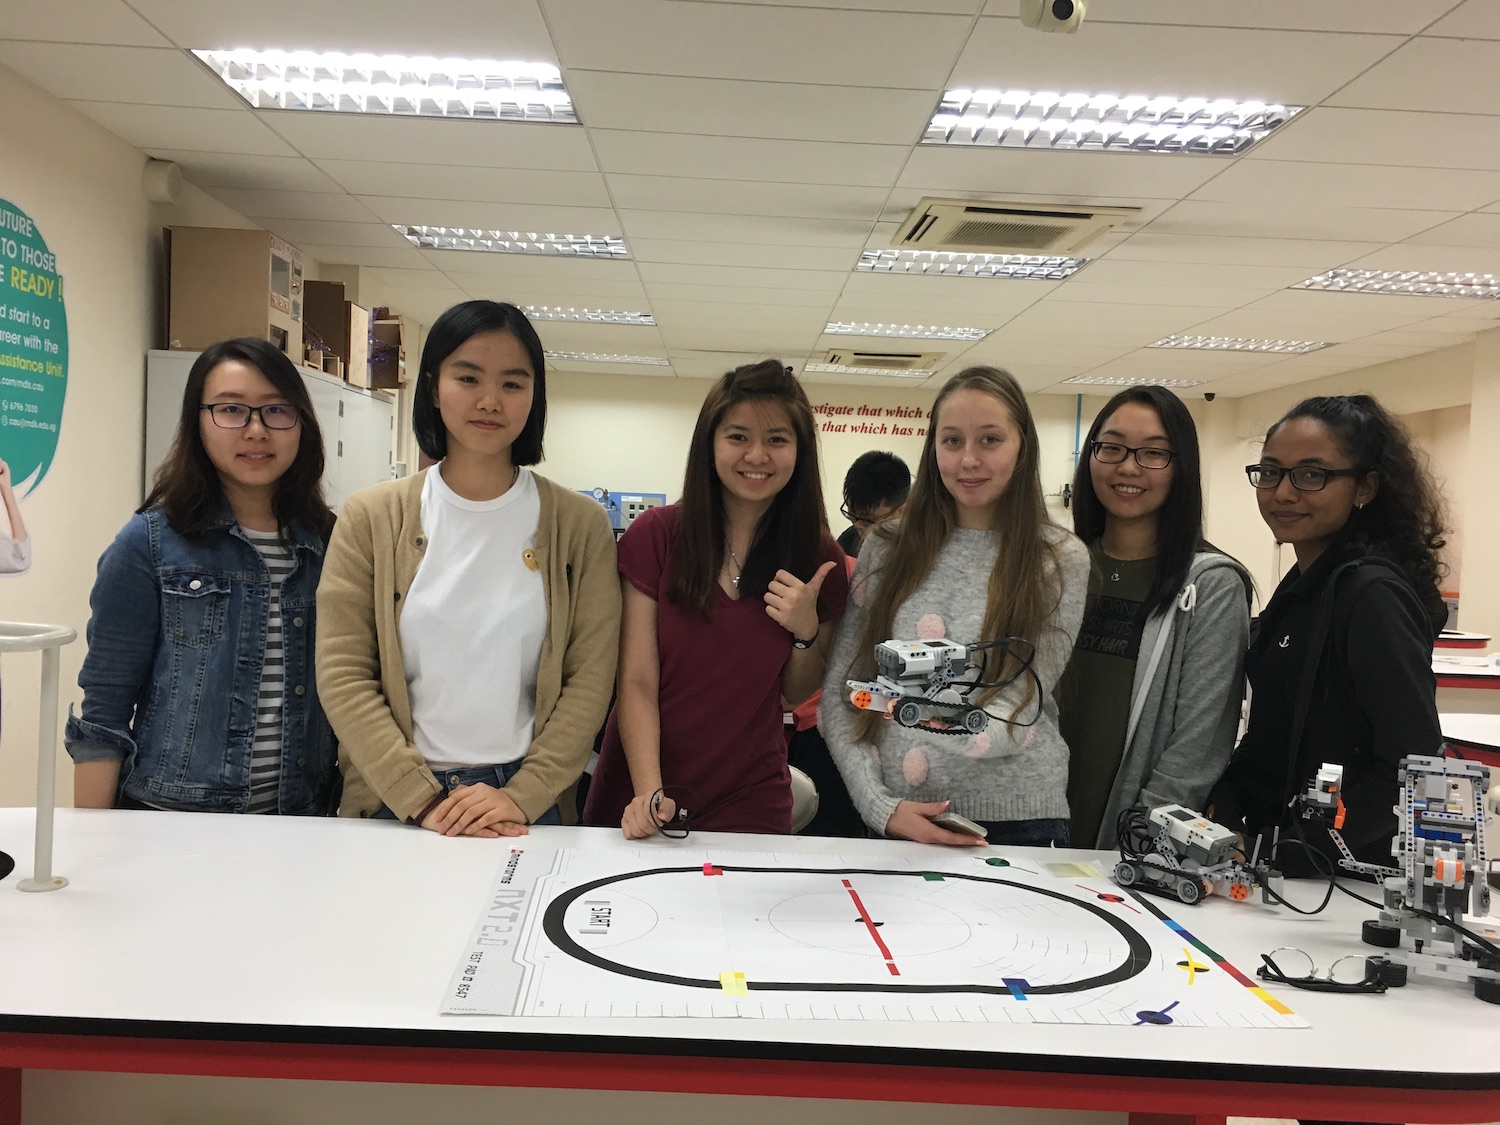 A group of female students posing for a picture in the engineering lab.